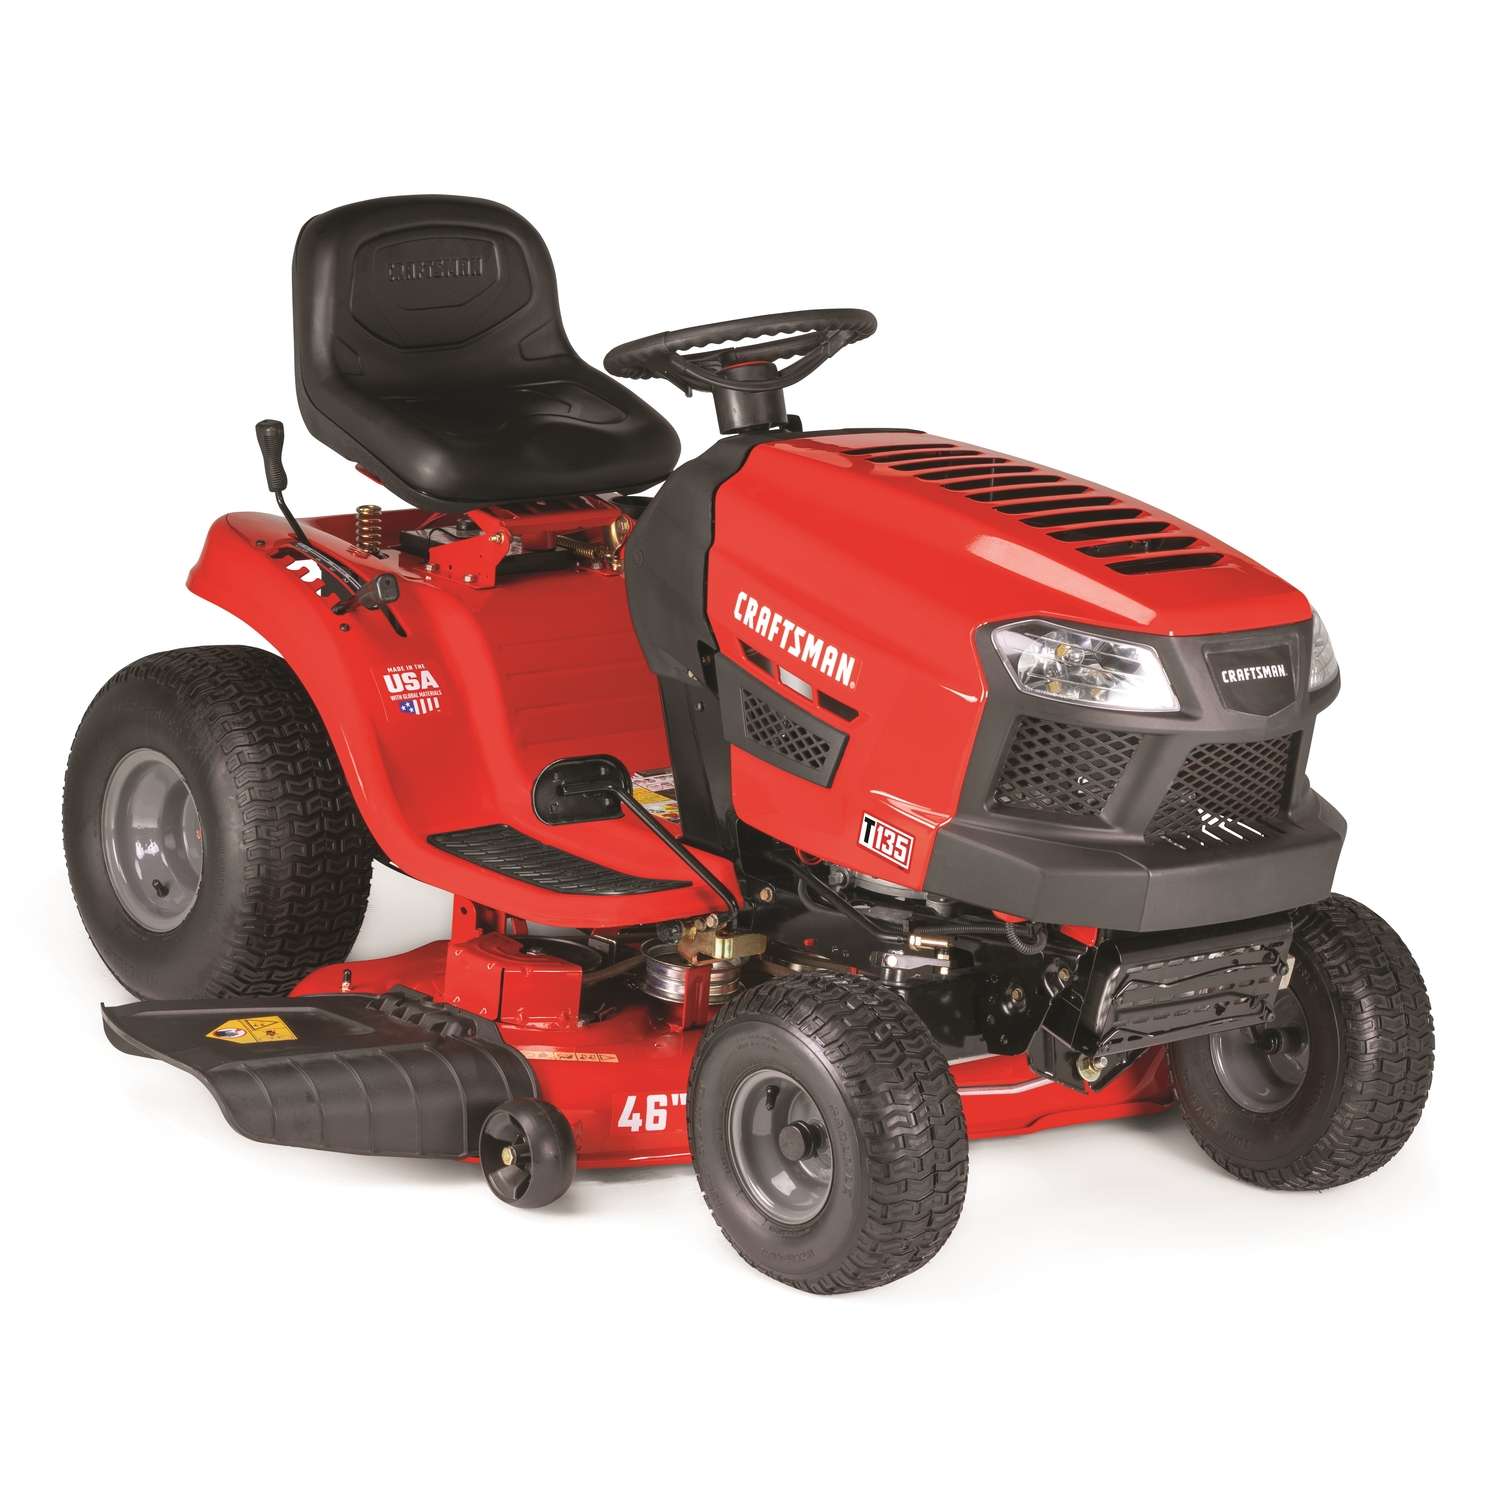 Craftsman 46 in. Automatic Gas Riding Mower Ace Hardware